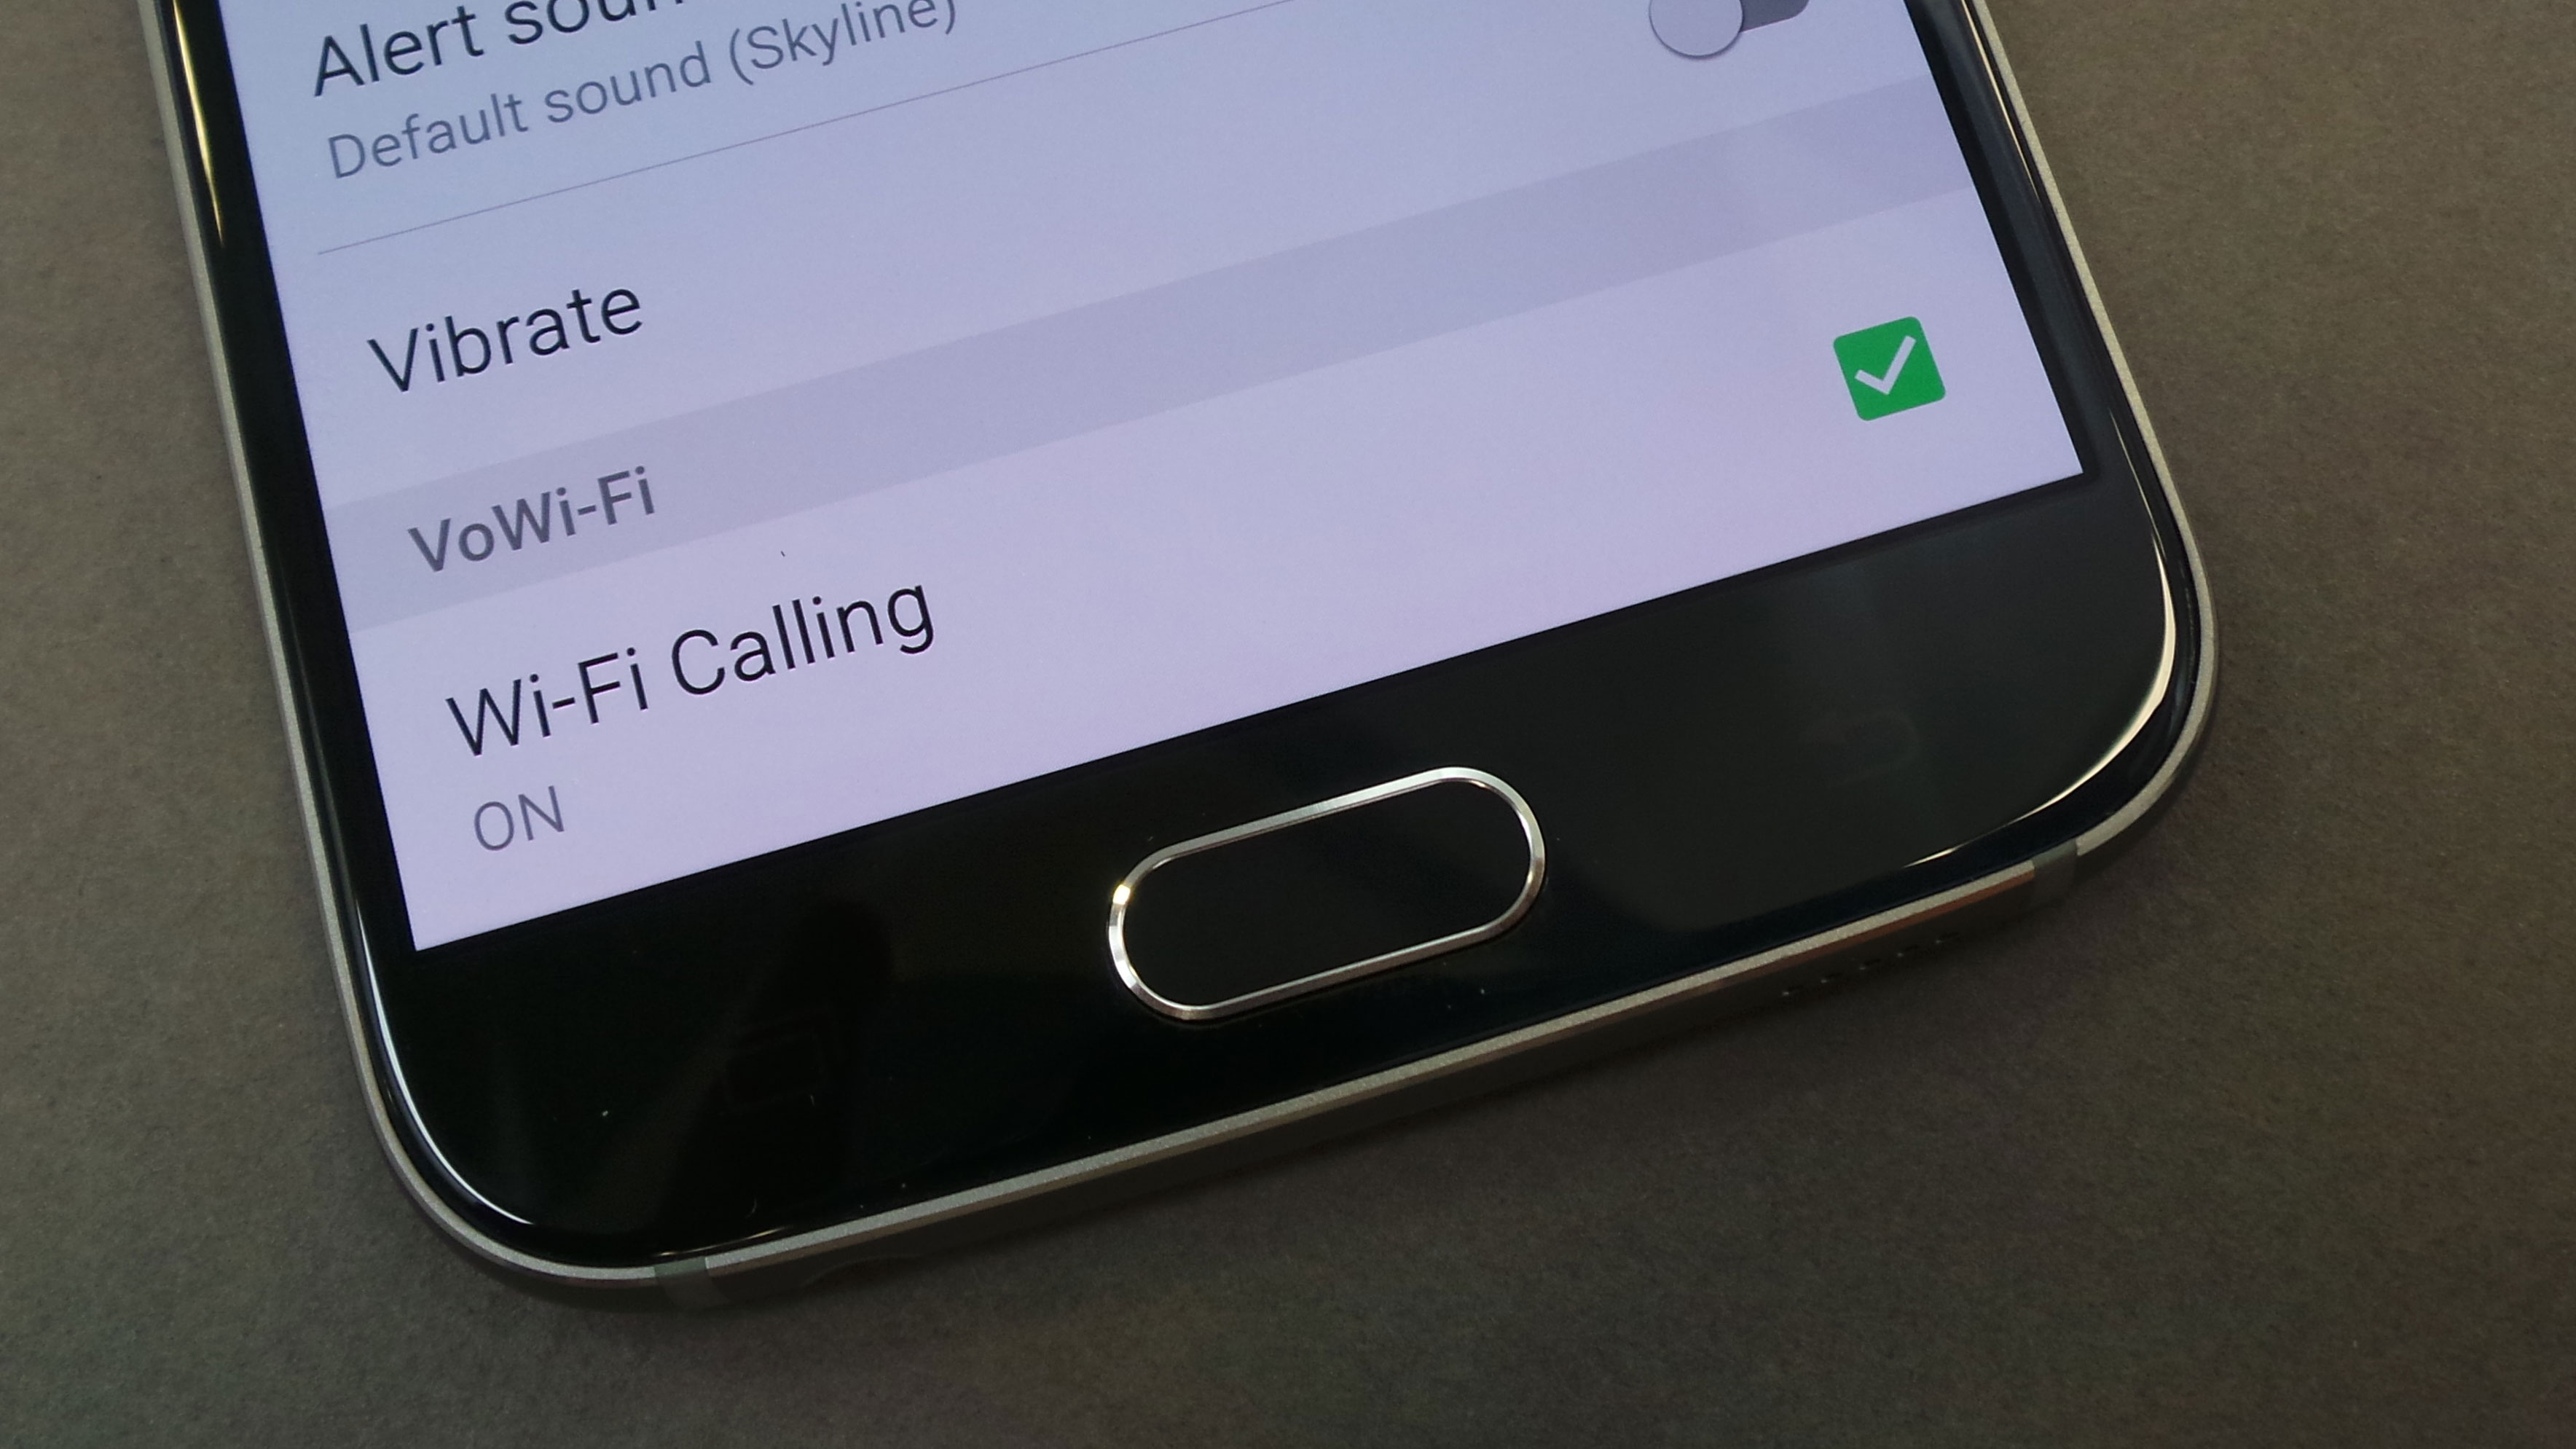 How to enable Airtel Wi-Fi Calling service?